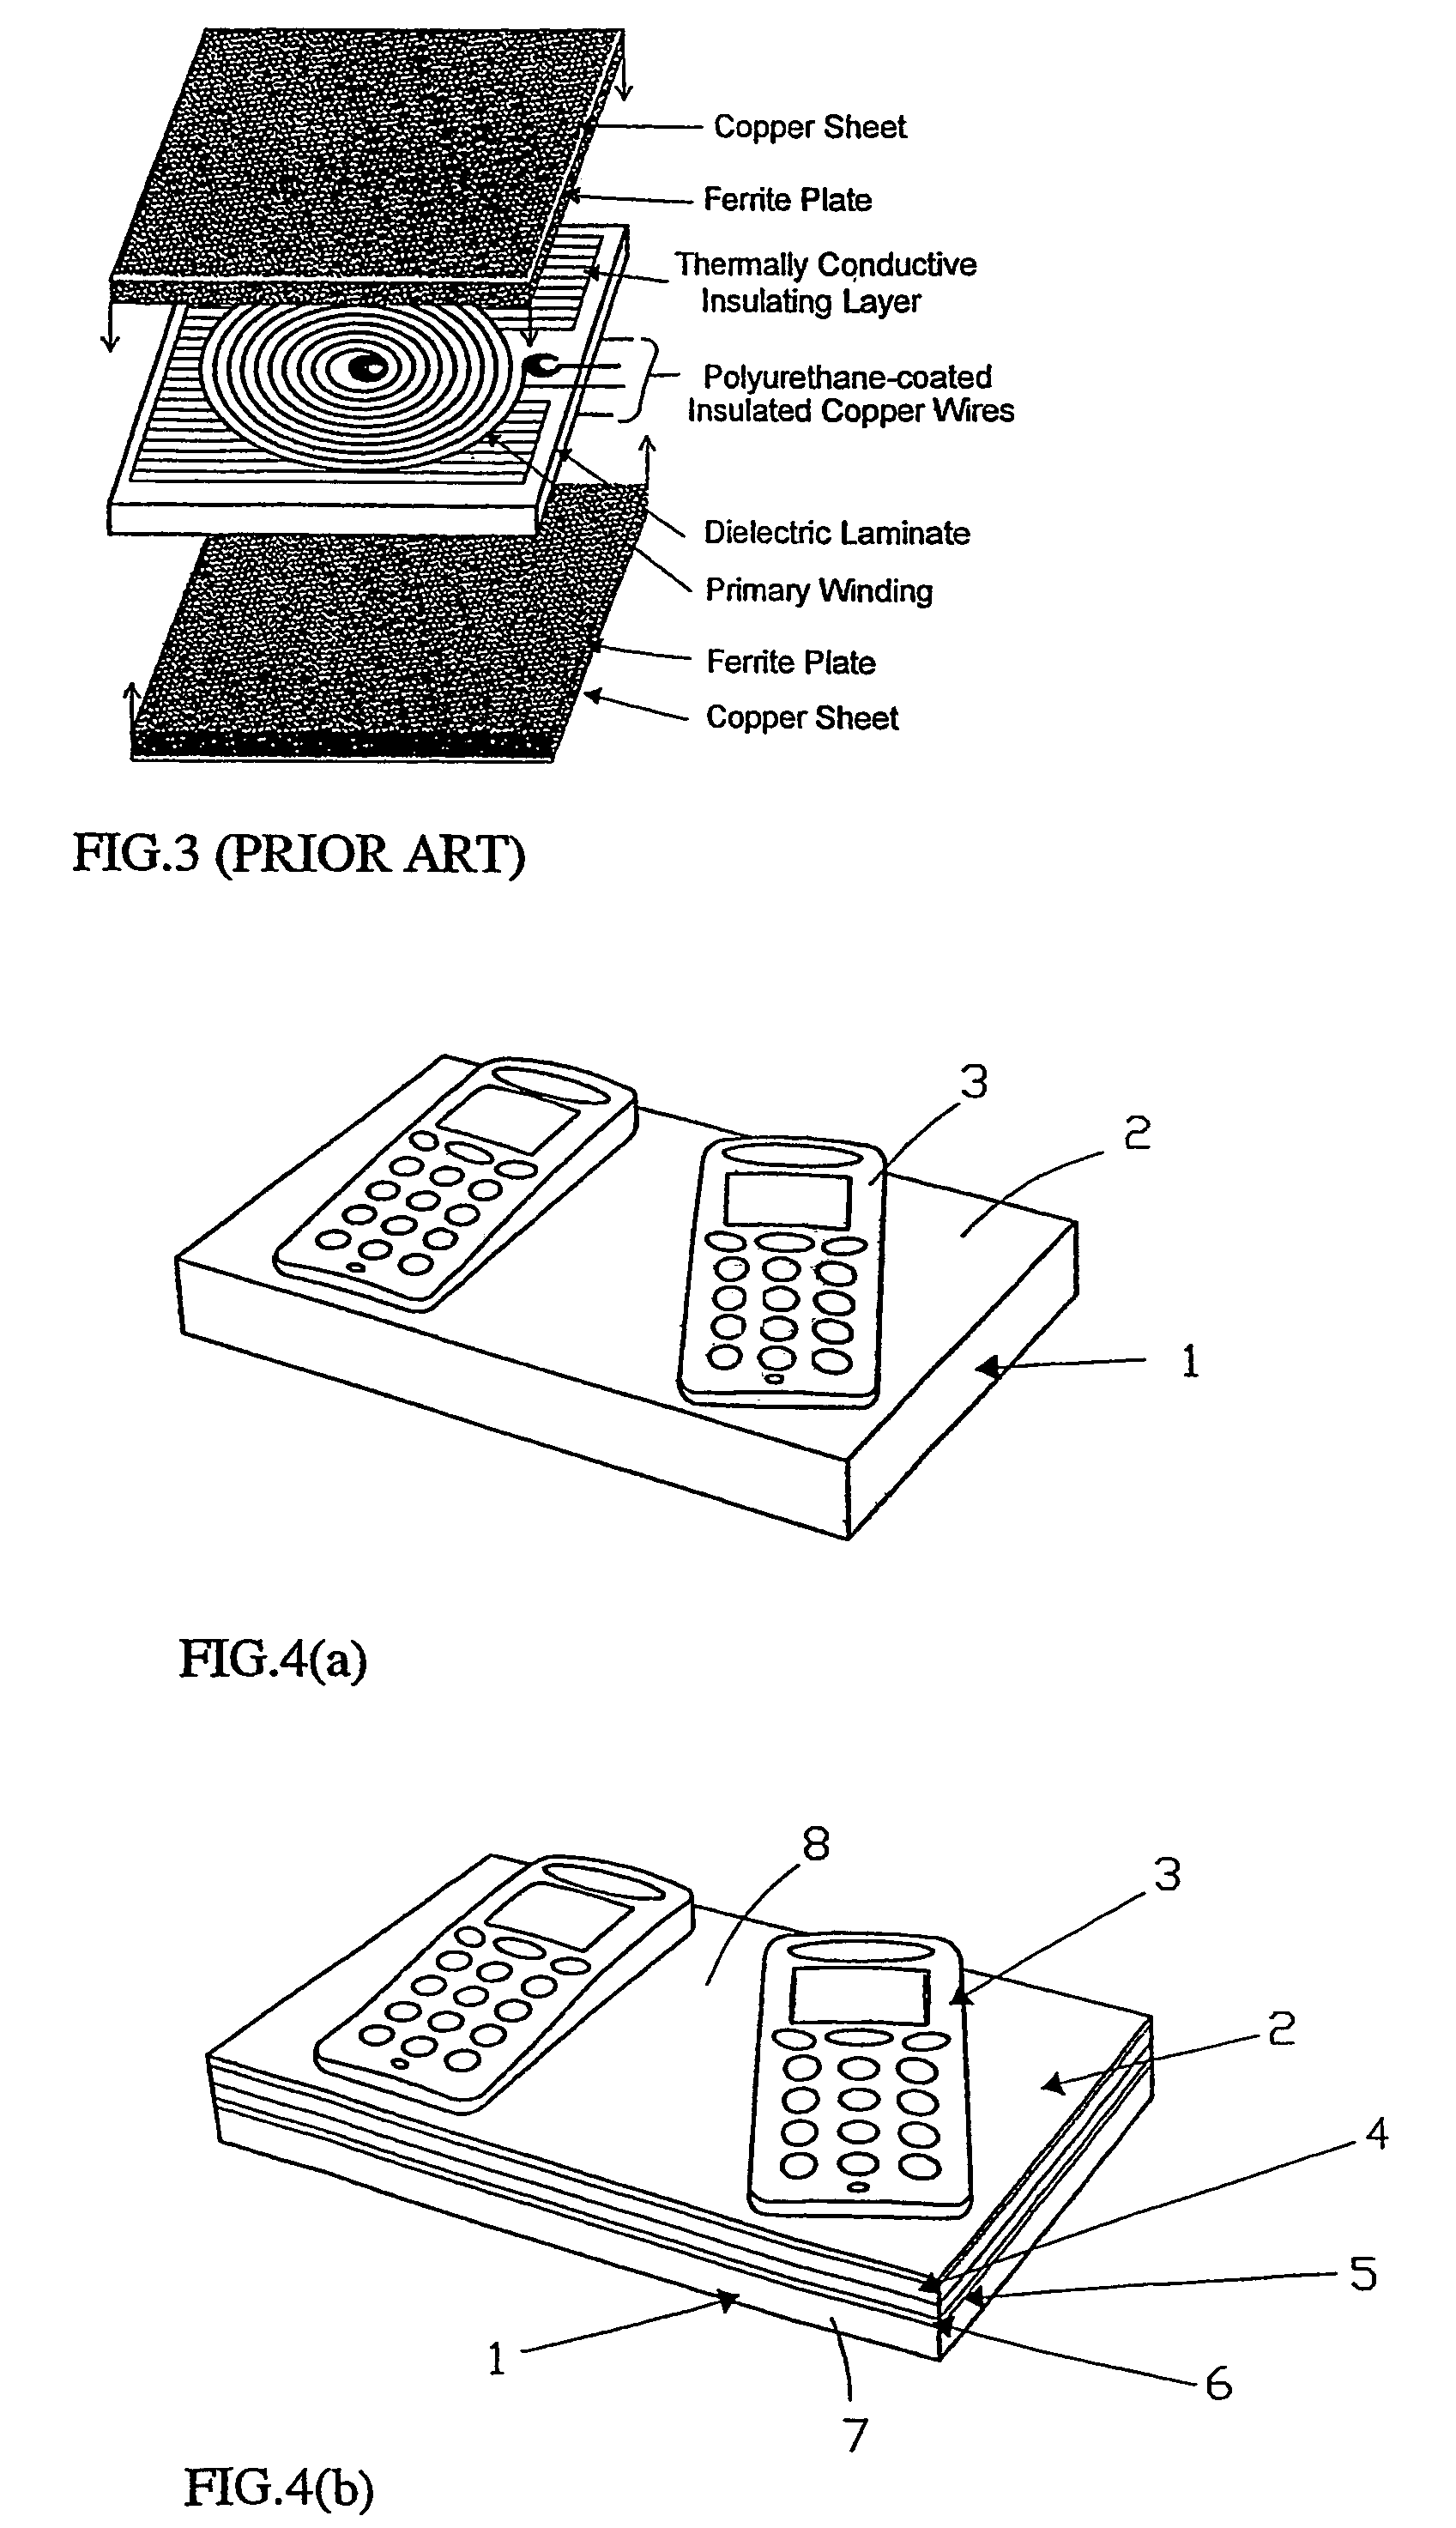 Inductive battery charger system with primary transformer windings formed in a multi-layer structure